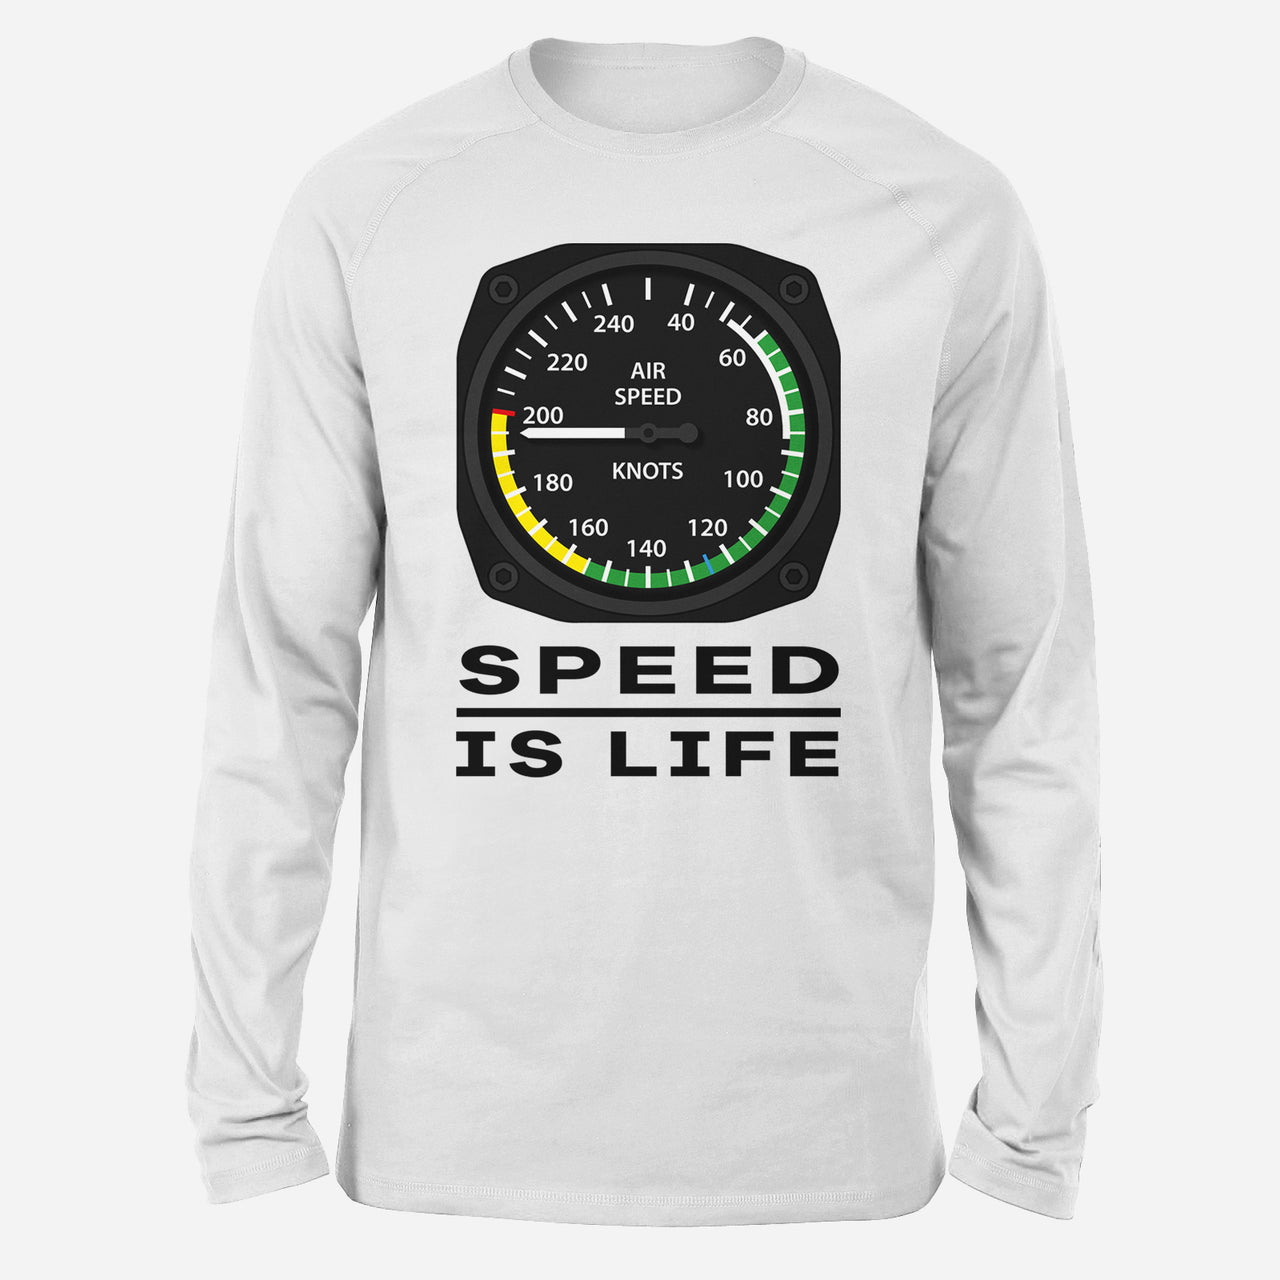 Speed Is Life Designed Long-Sleeve T-Shirts